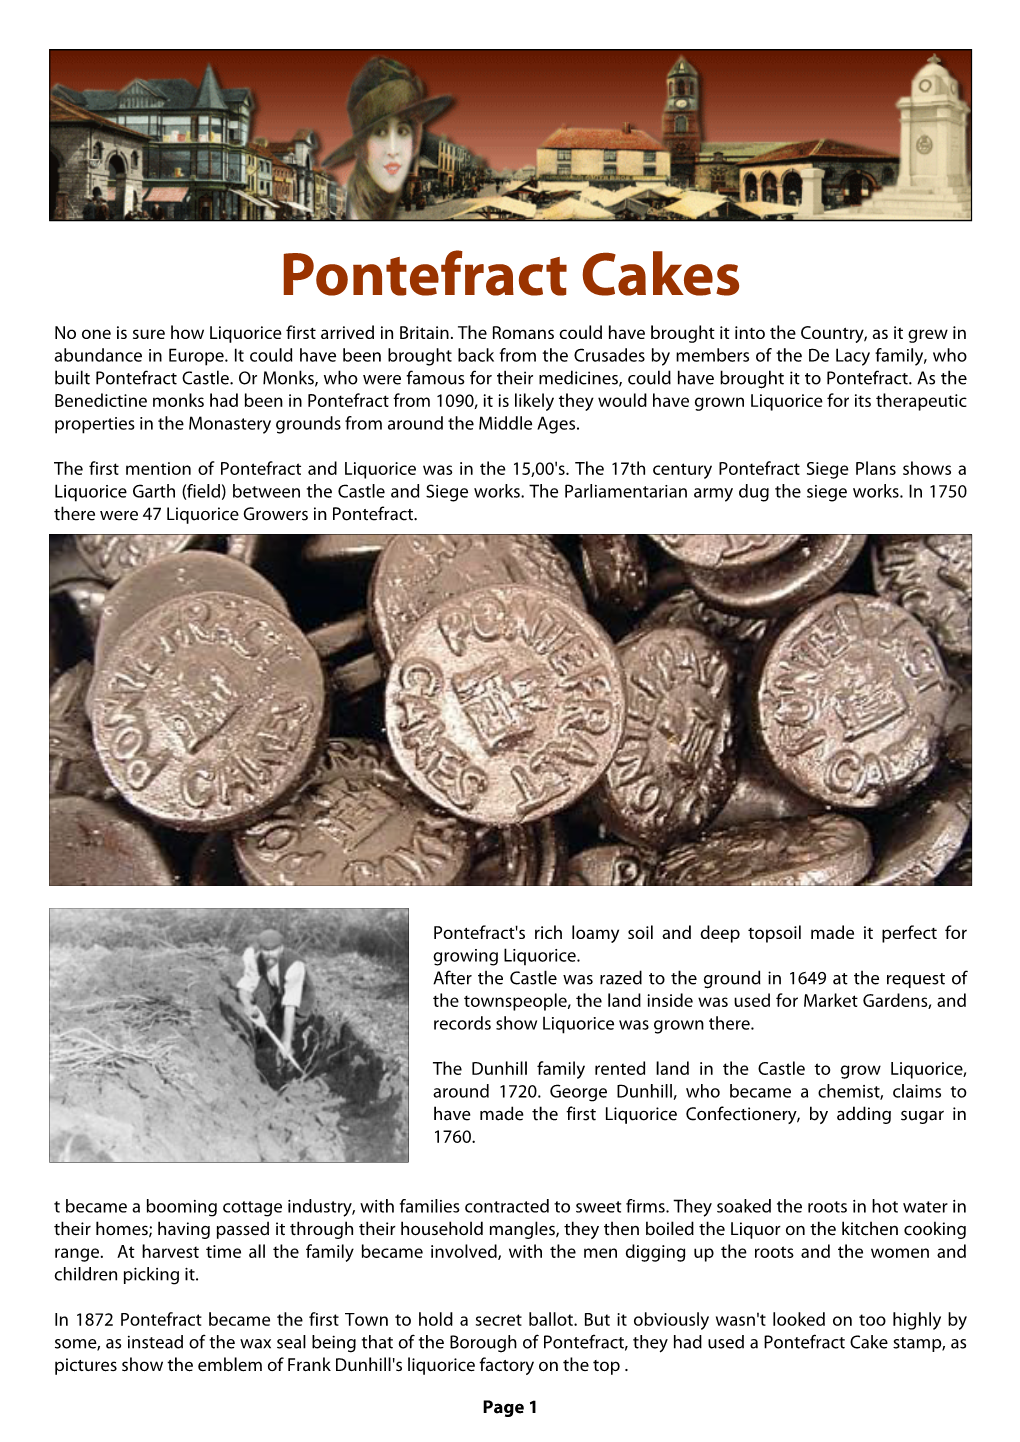 Pontefract Cakes No One Is Sure How Liquorice First Arrived in Britain